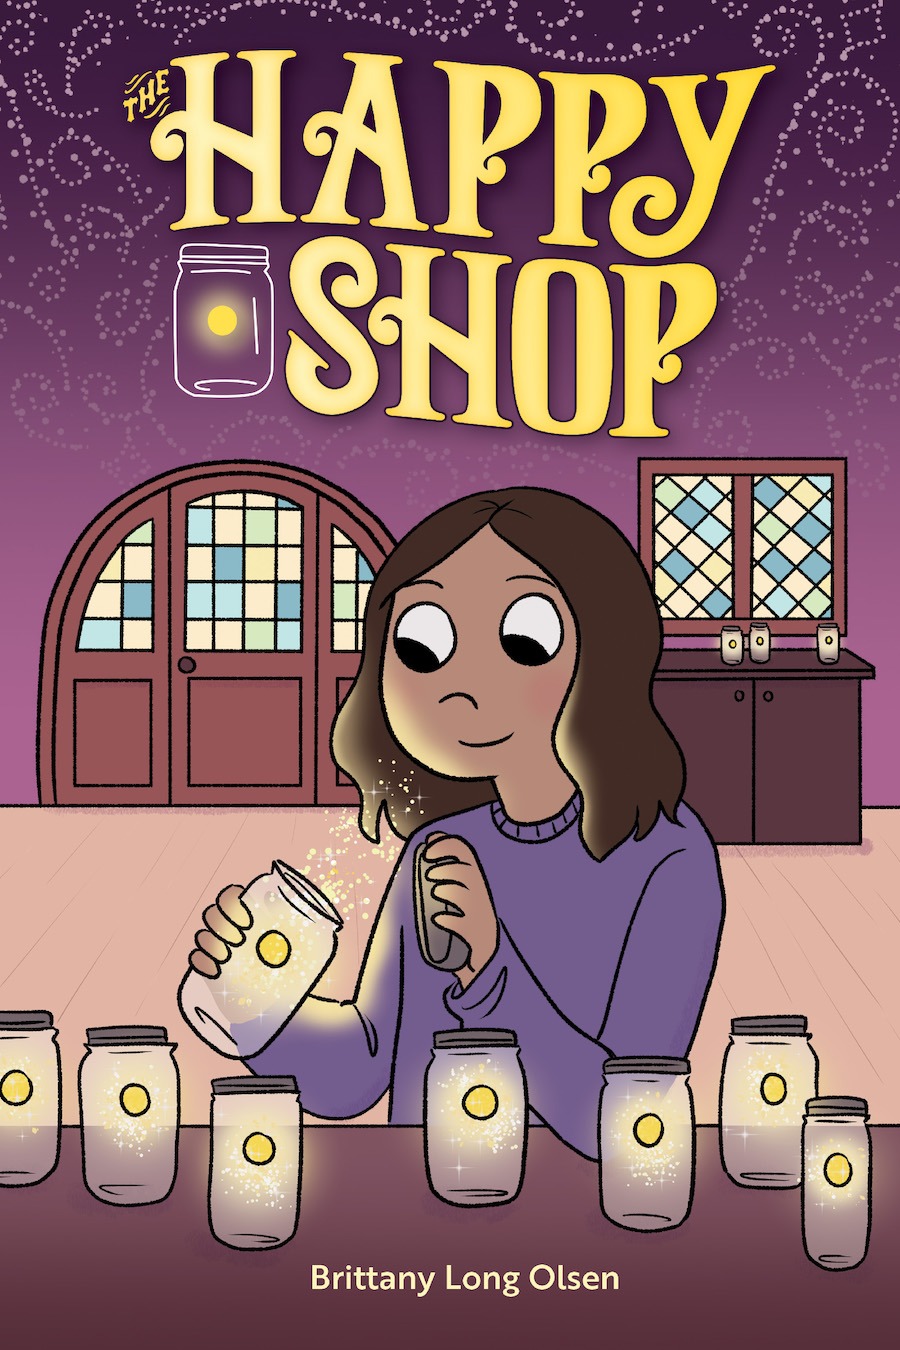 Cover of The Happy Shop, showing a girl standing by a table on which are seven jars with glowing golden spheres inside; she is holding an identical jar, which she has opened, and gold sparkles are flowing toward her face.